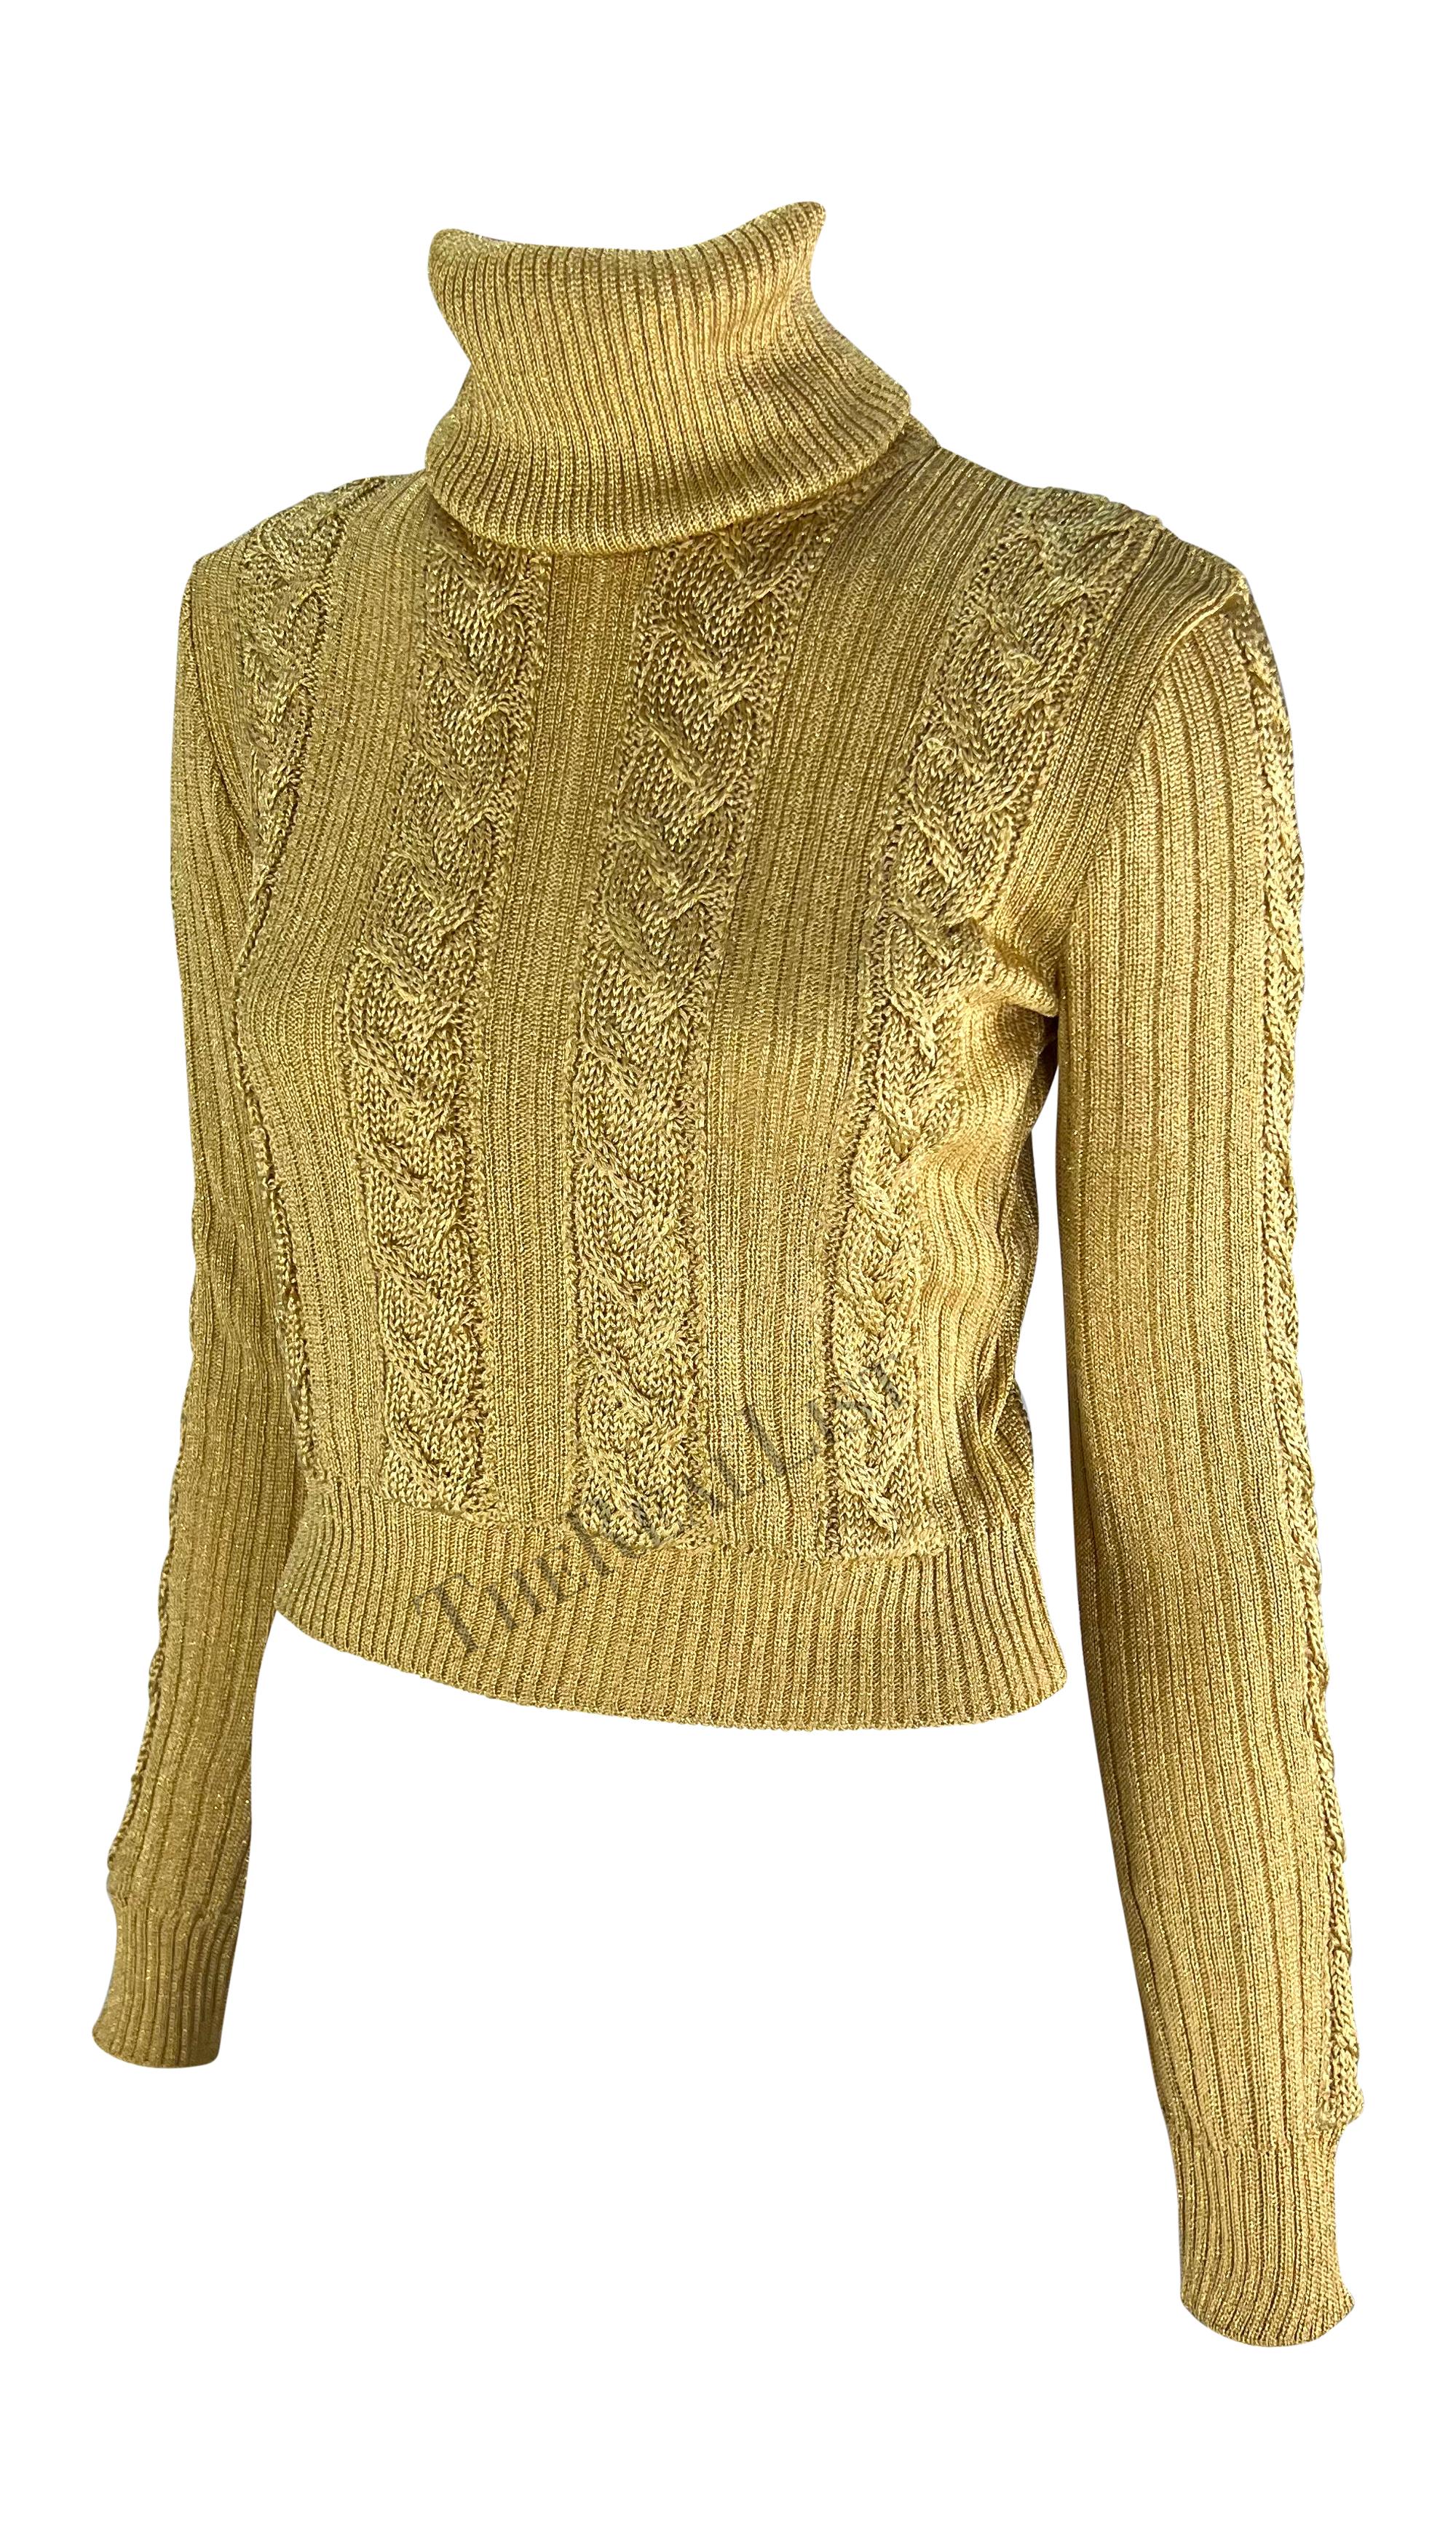 Women's F/W 1994 Gianni Versace Ad Runway Gold Metallic Cable Knit Turtleneck Sweater For Sale